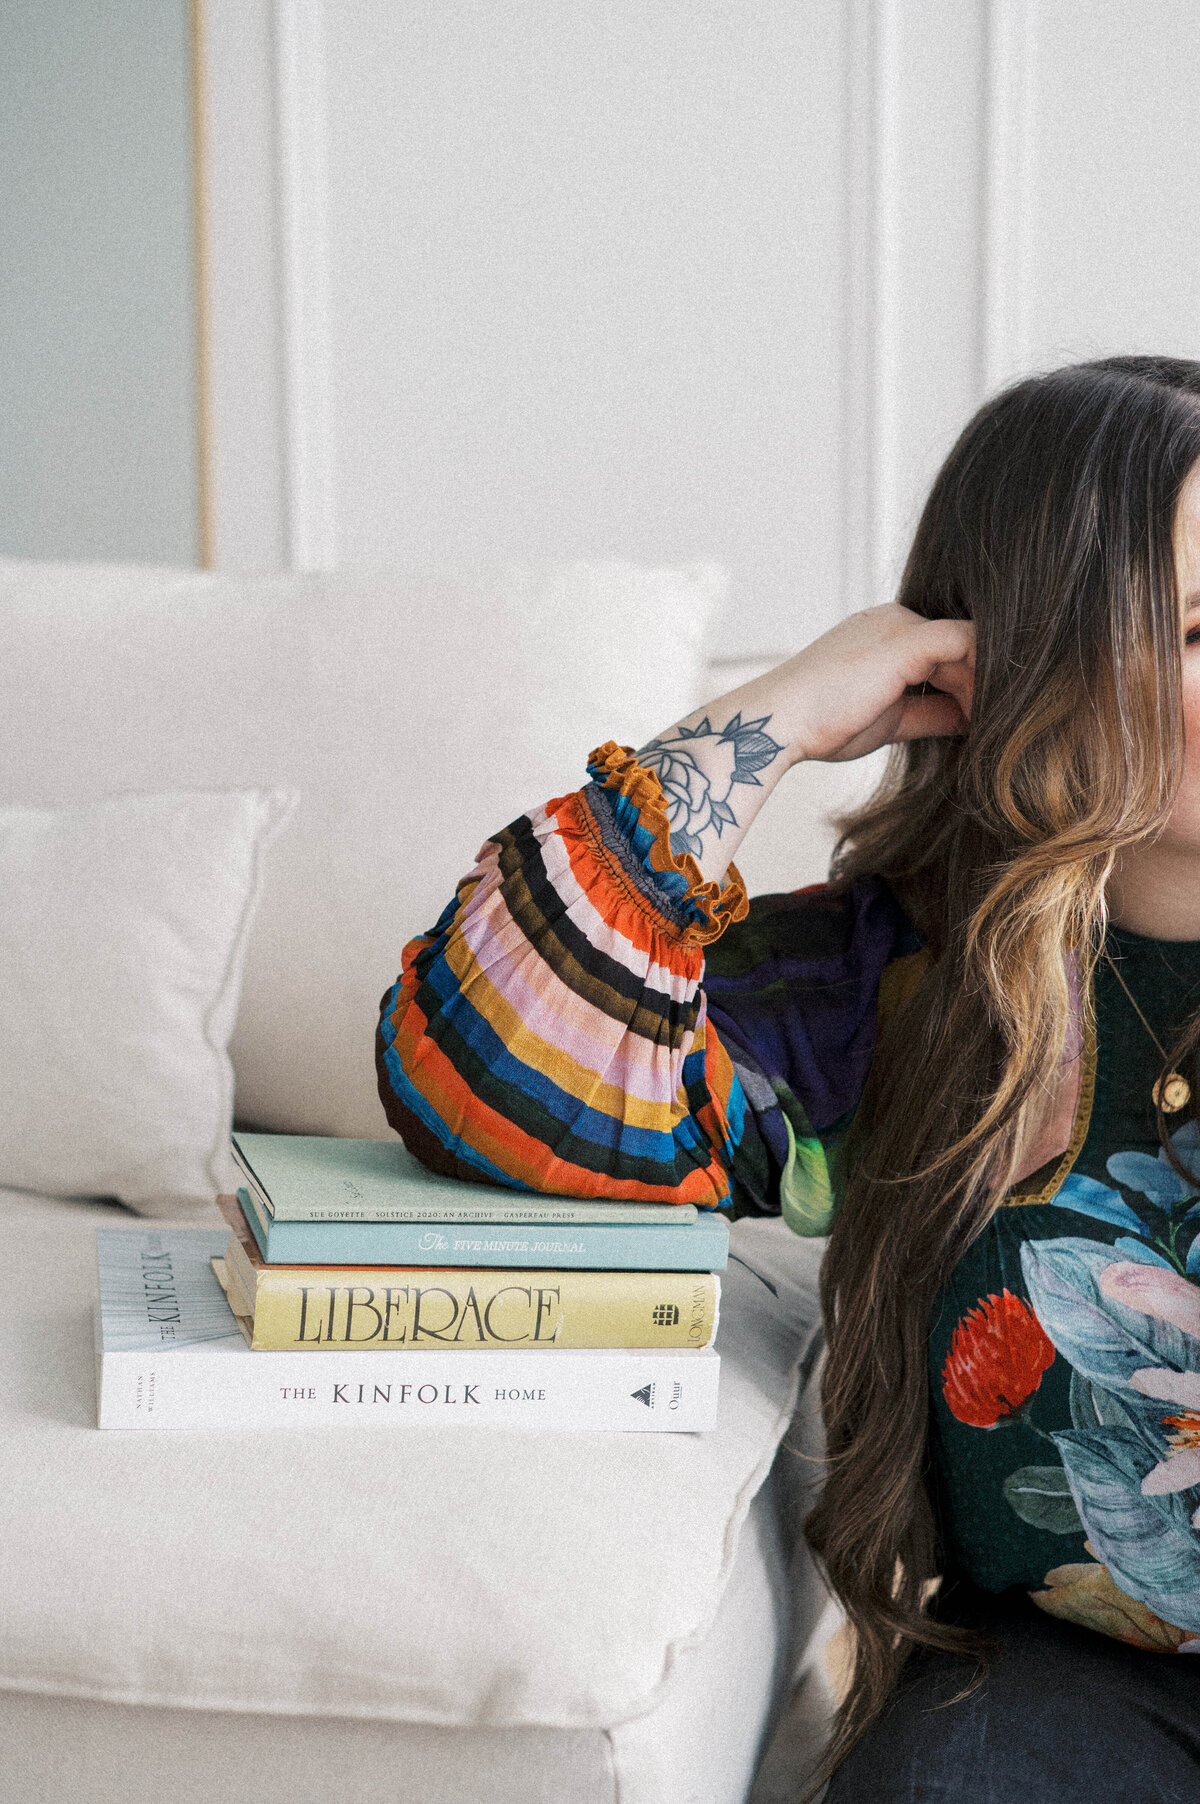 Woman with long hair in colourful shirt leaning on stack of books on a couch